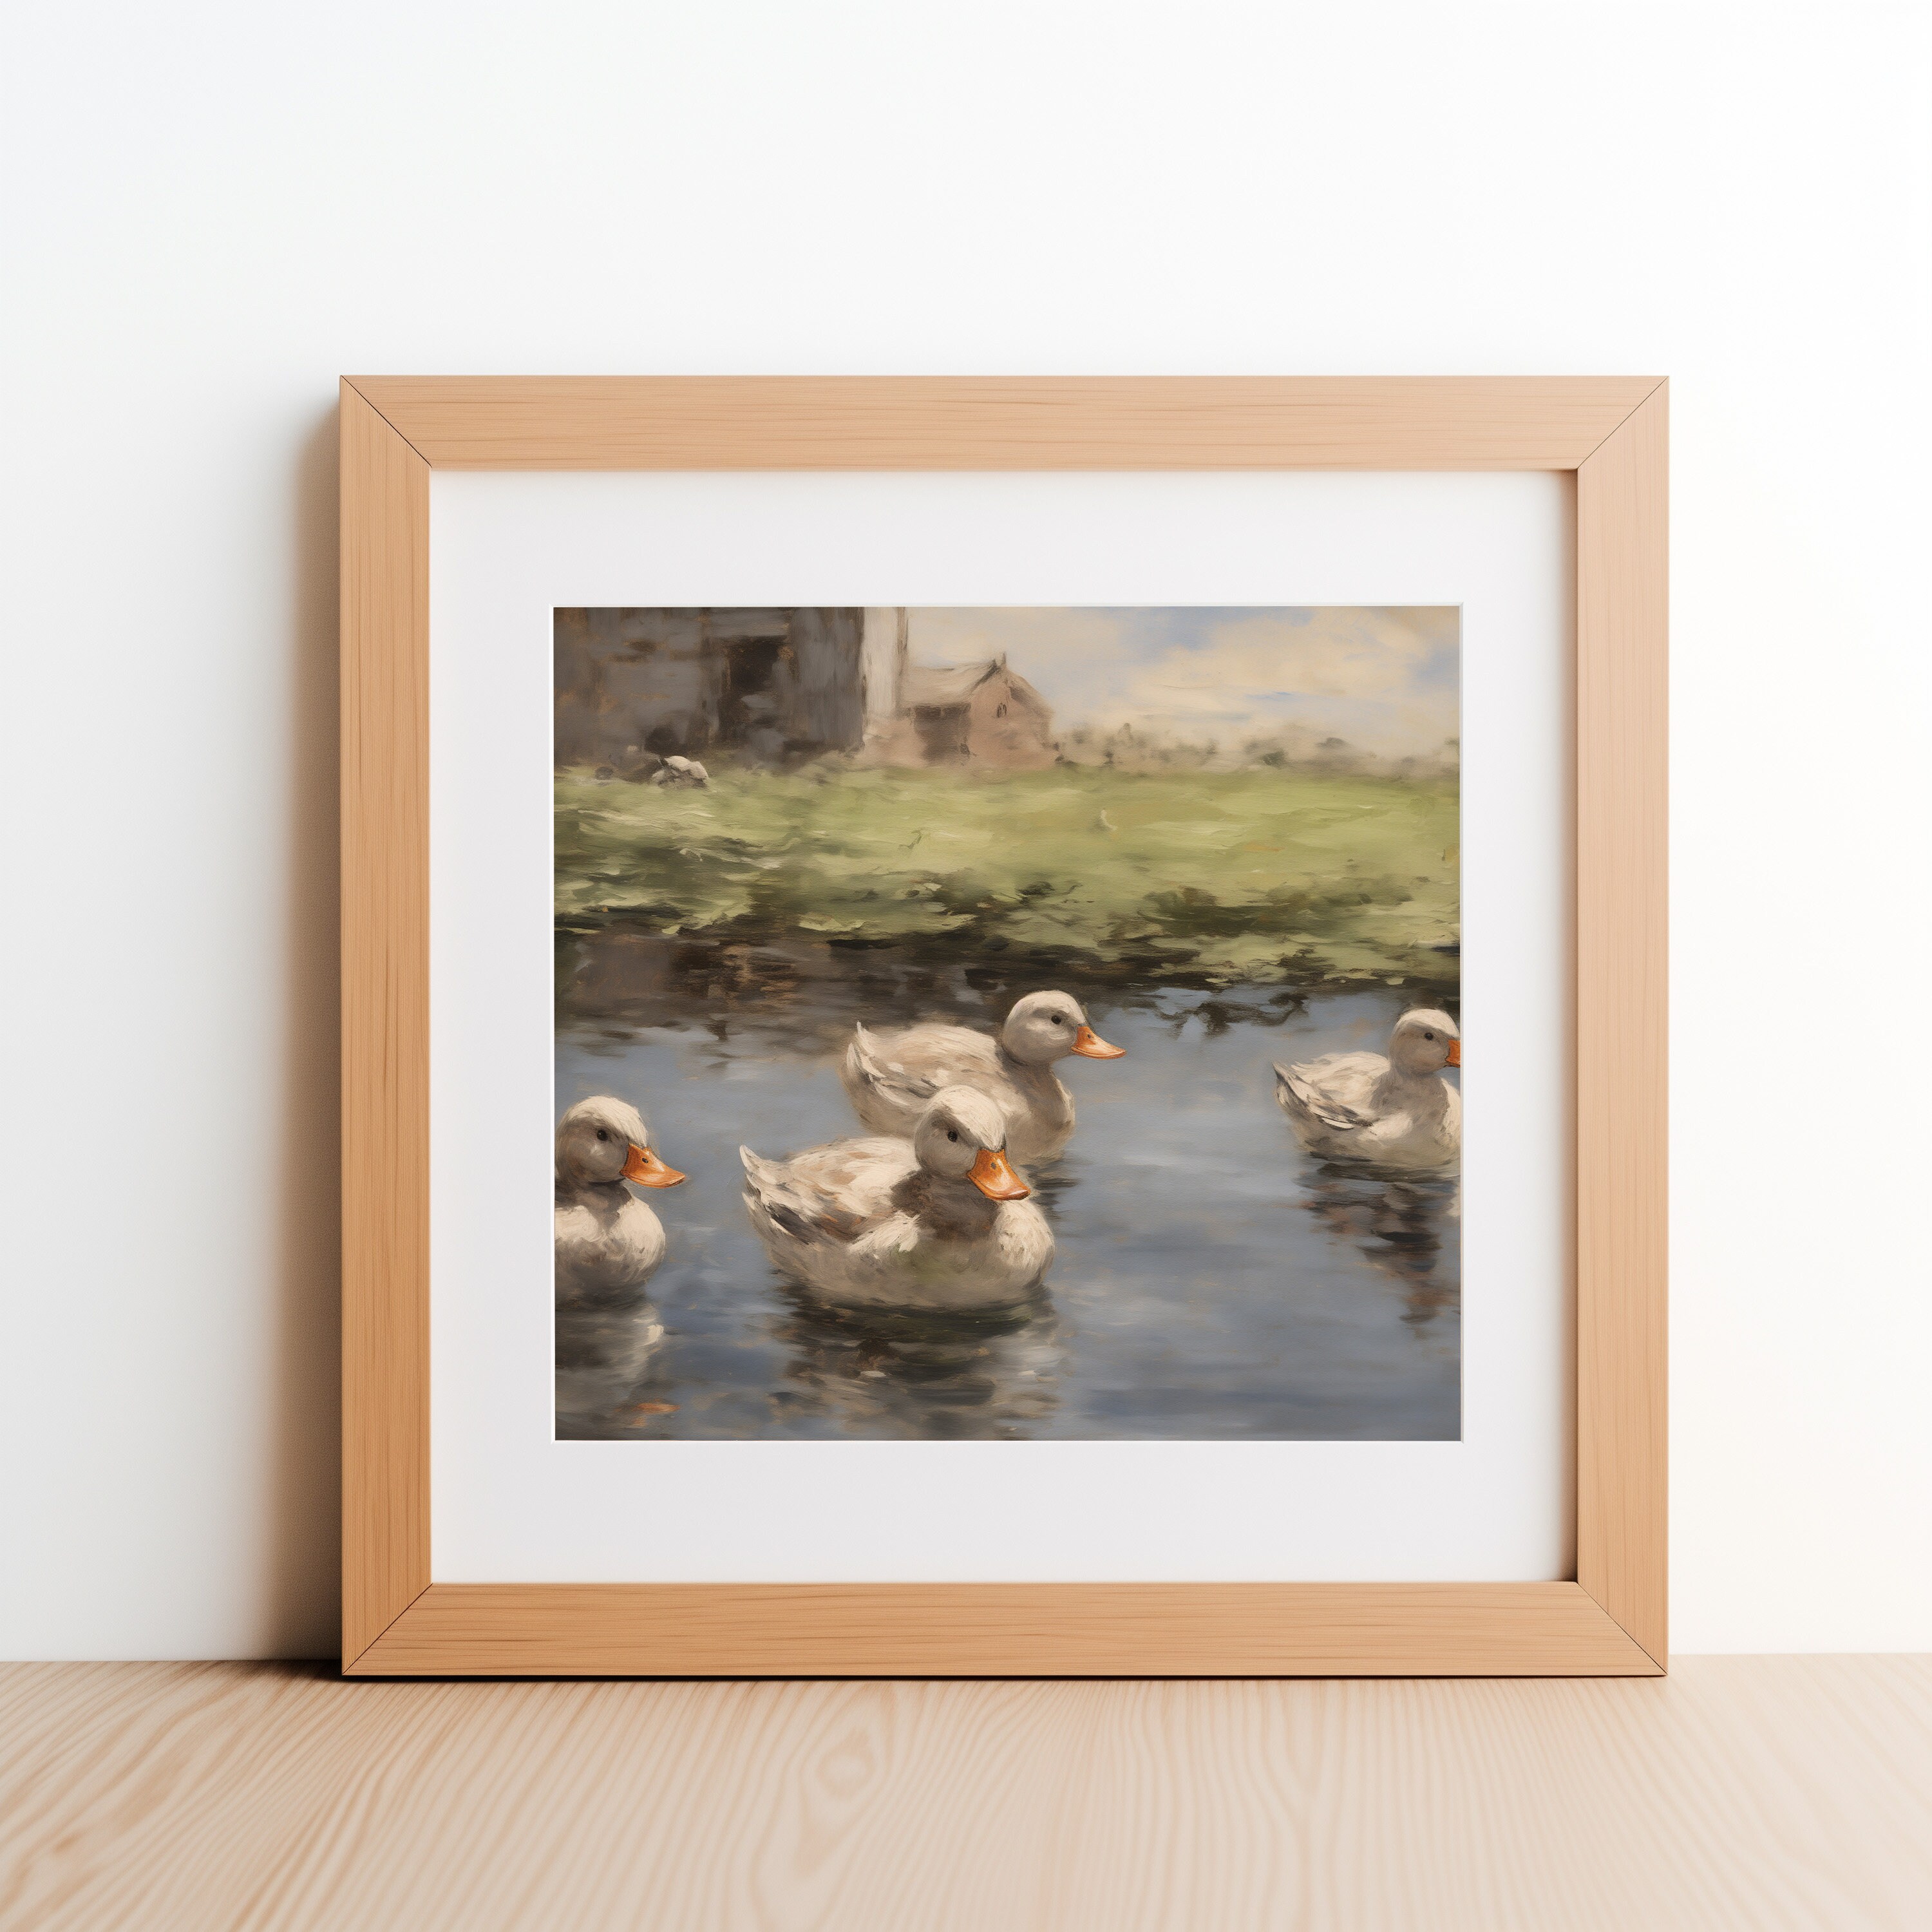 Vintage Style Kitchen Farm Wall Art Print Ducks In A Pond Oil Painting